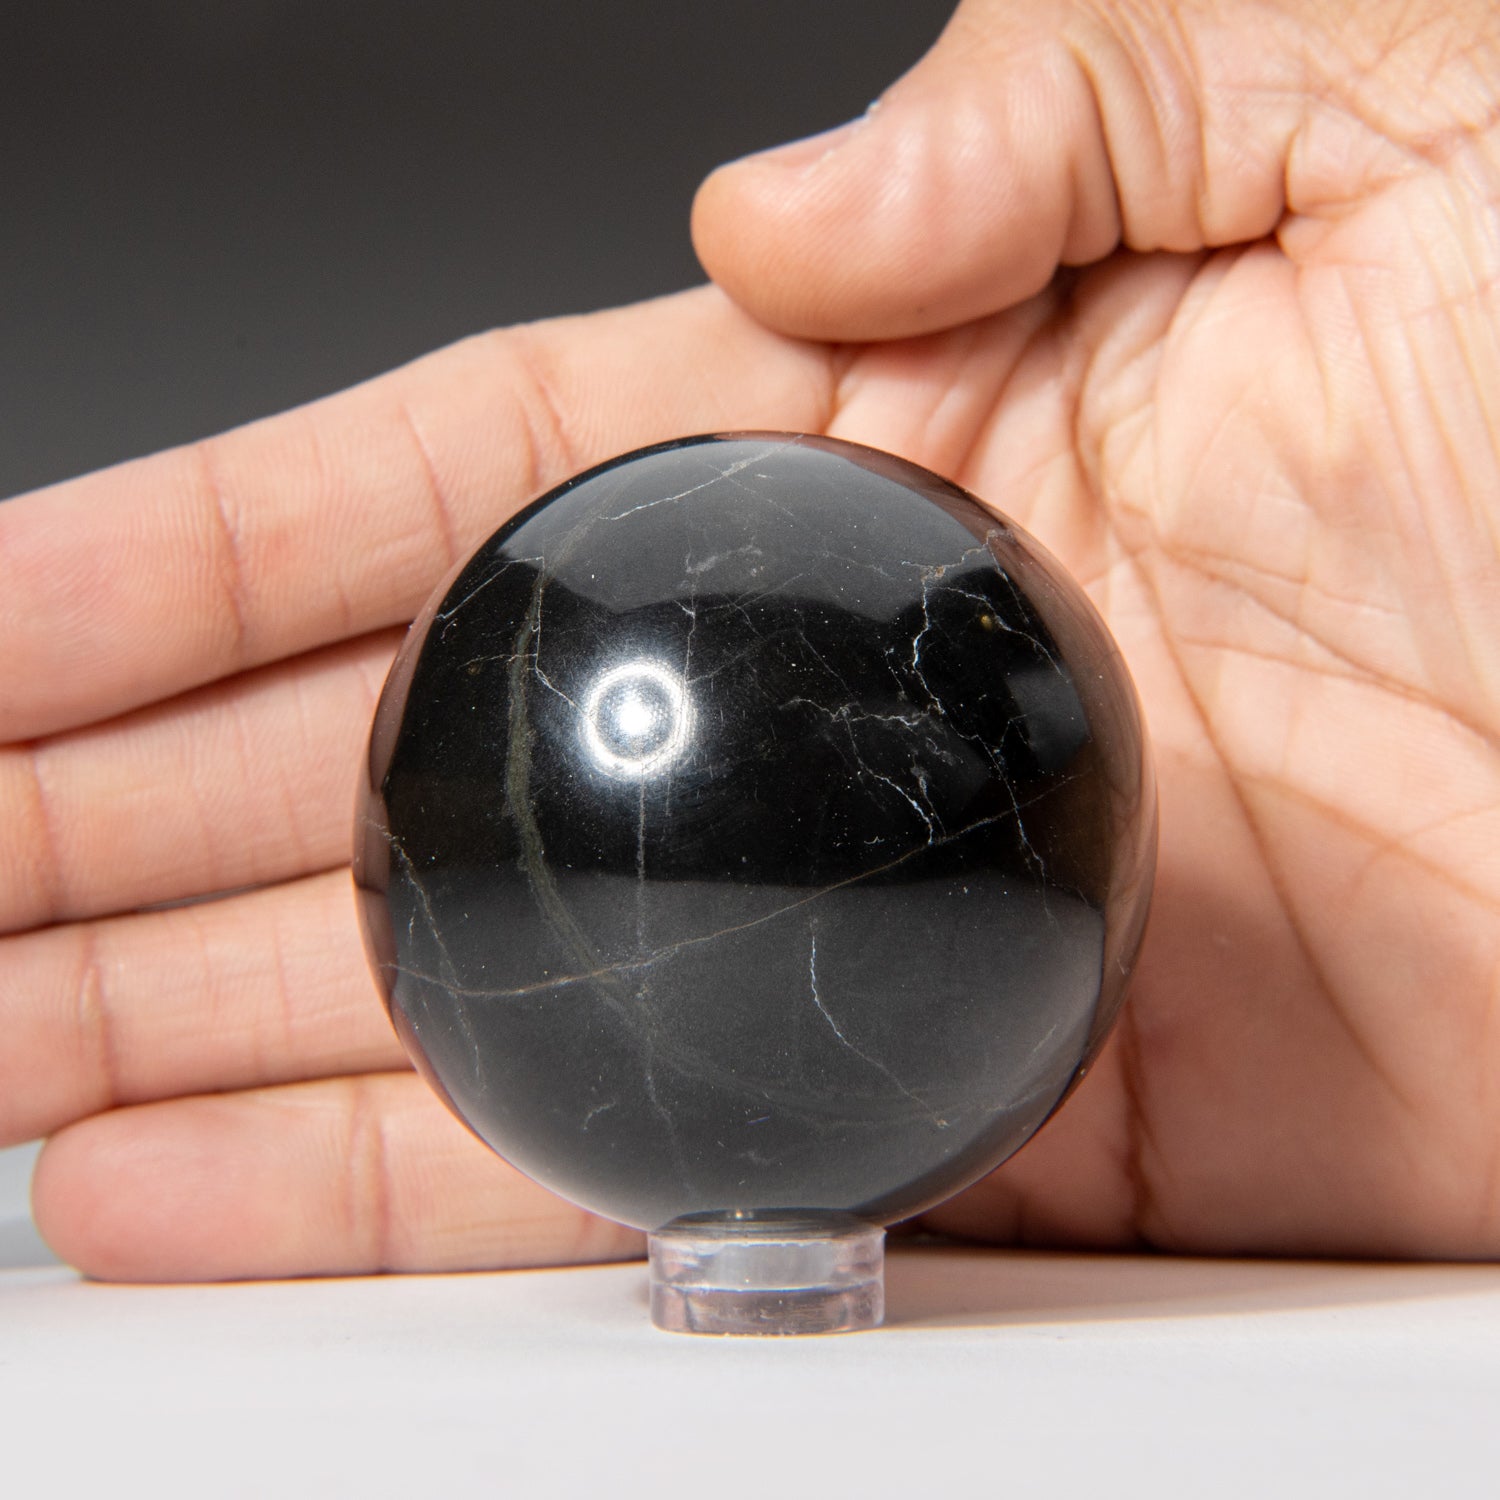 Genuine Polished Black Agate Sphere (2") with Acrylic Display Stand